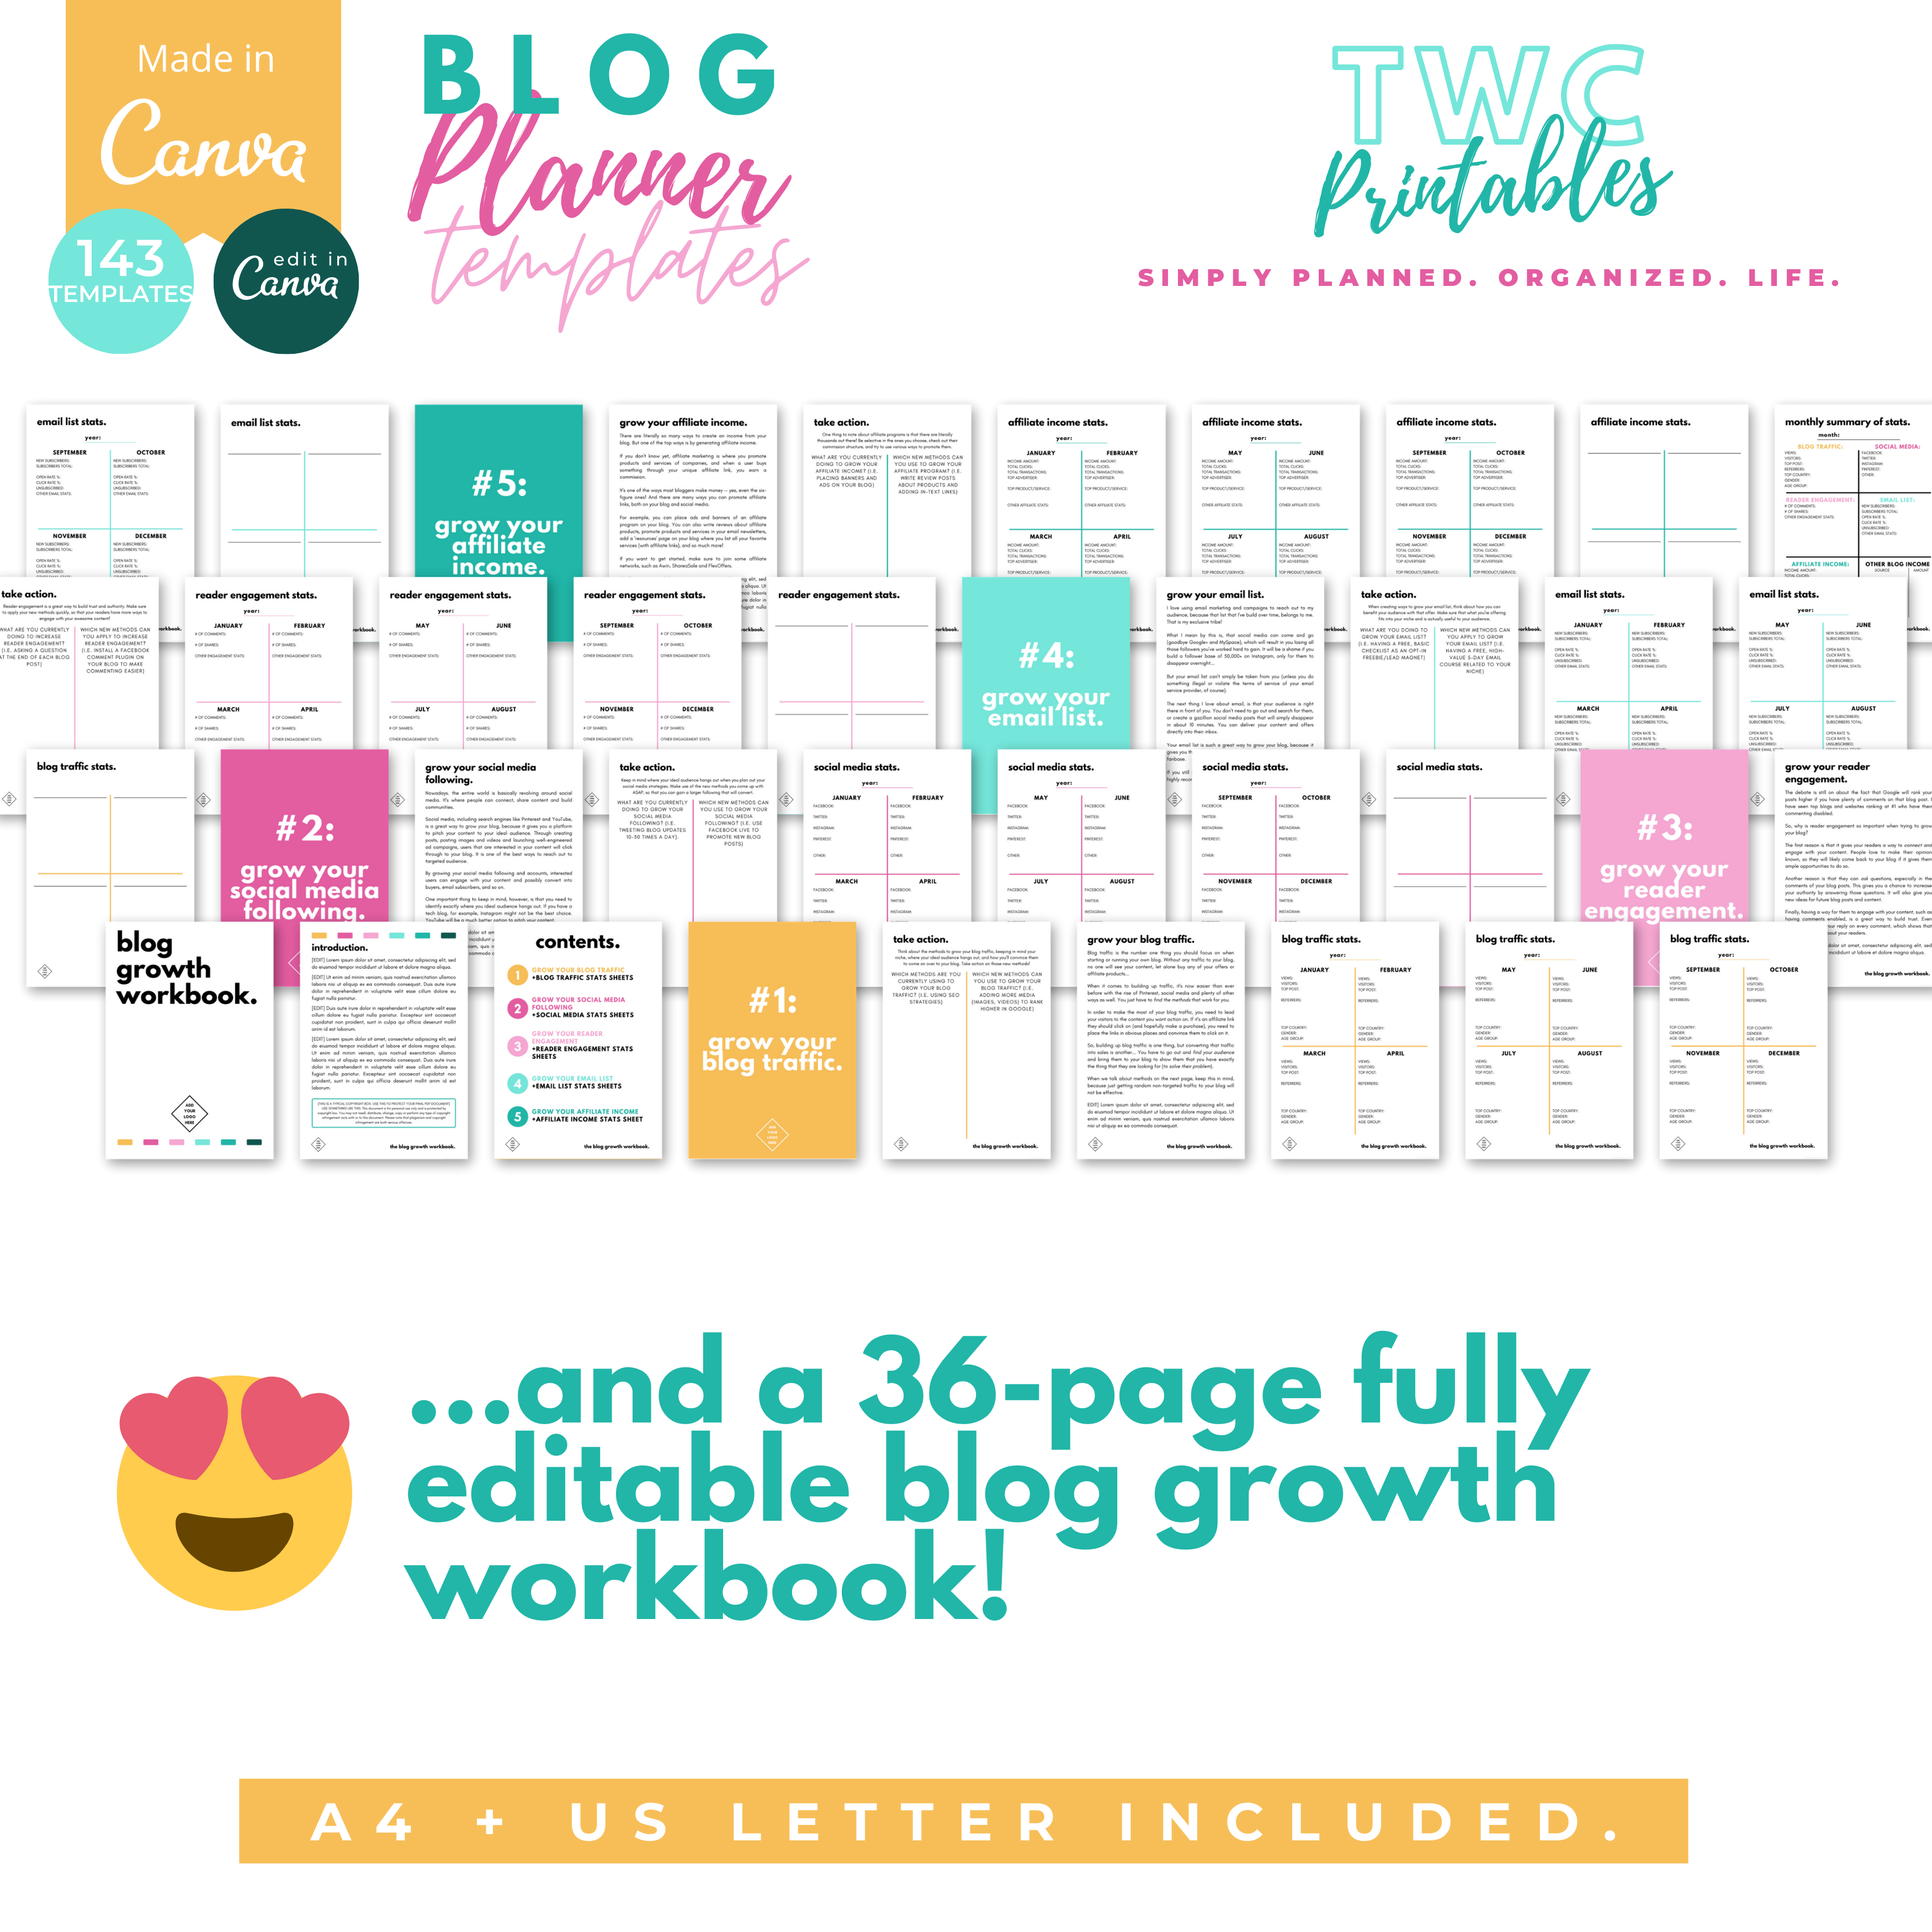 Plan and manage your blog with these handy editable blog planner templates for Canva! These sheets will help you to keep track of your blog stats, posts, sharing your blog content on social media, manage your blog like a business and so much more! You can change everything from colors to fonts, text, elements, etc. all you need is a free Canva account.